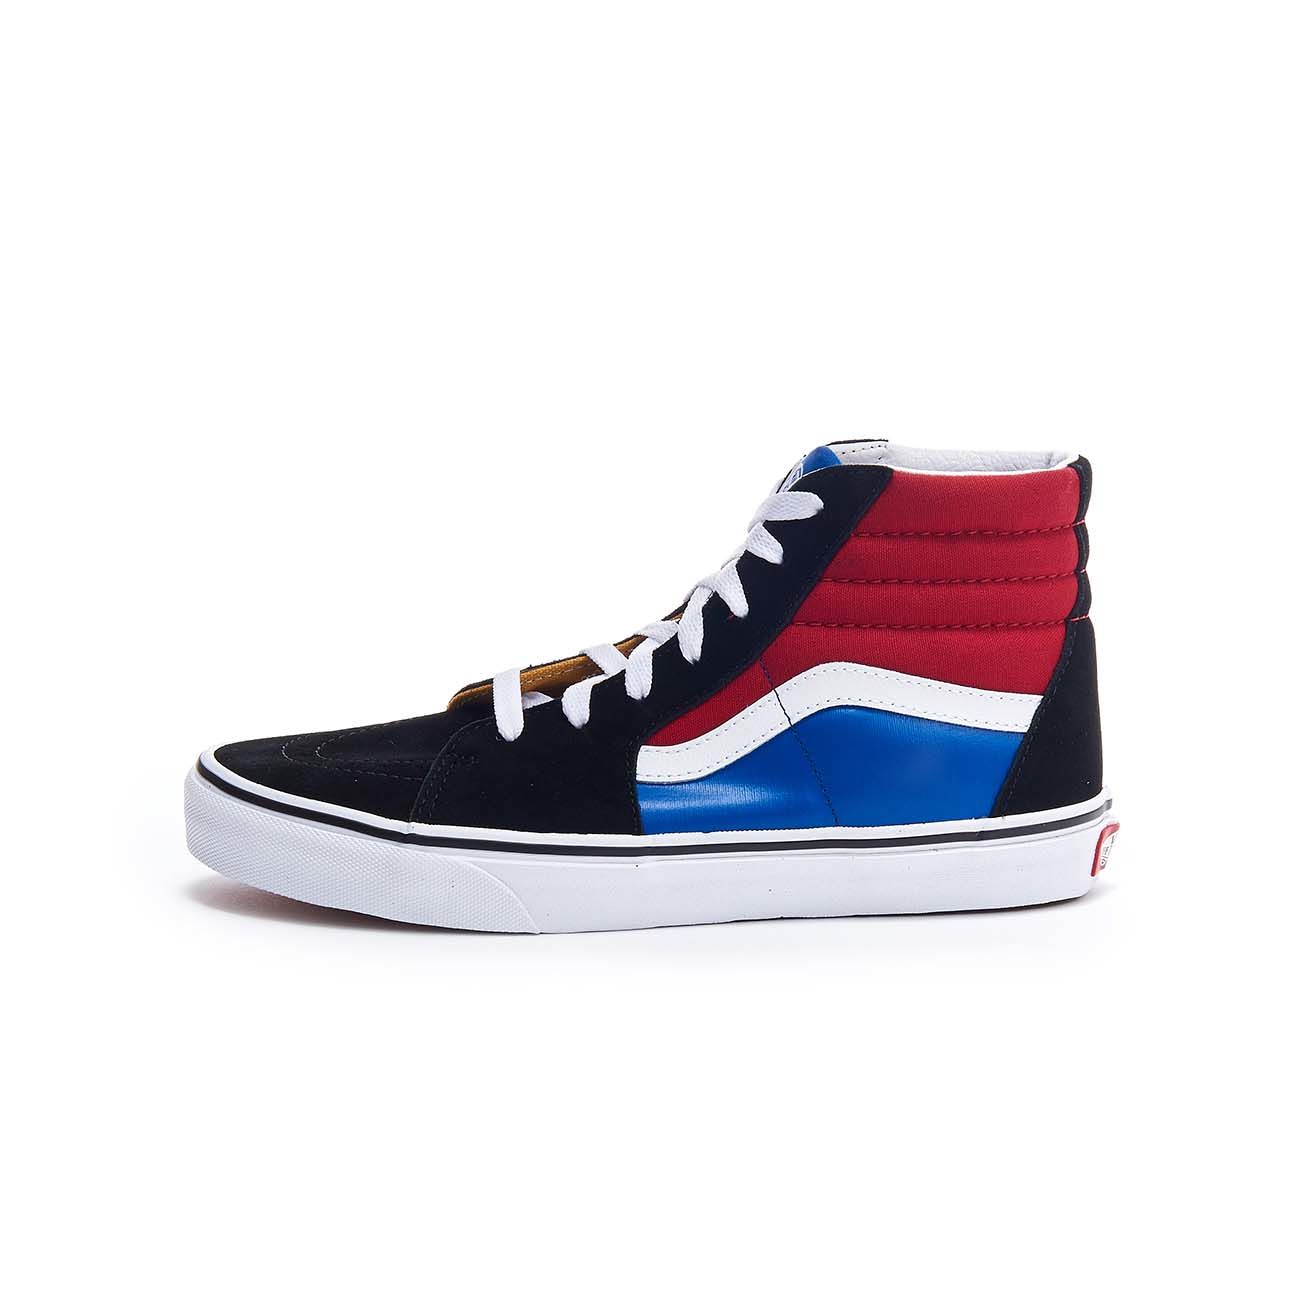 HIGH Chilli Kid Mascheroni | Store ECO-LEATHER SNEAKER VANS FABRIC Black AND IN Pepper SK8-HI